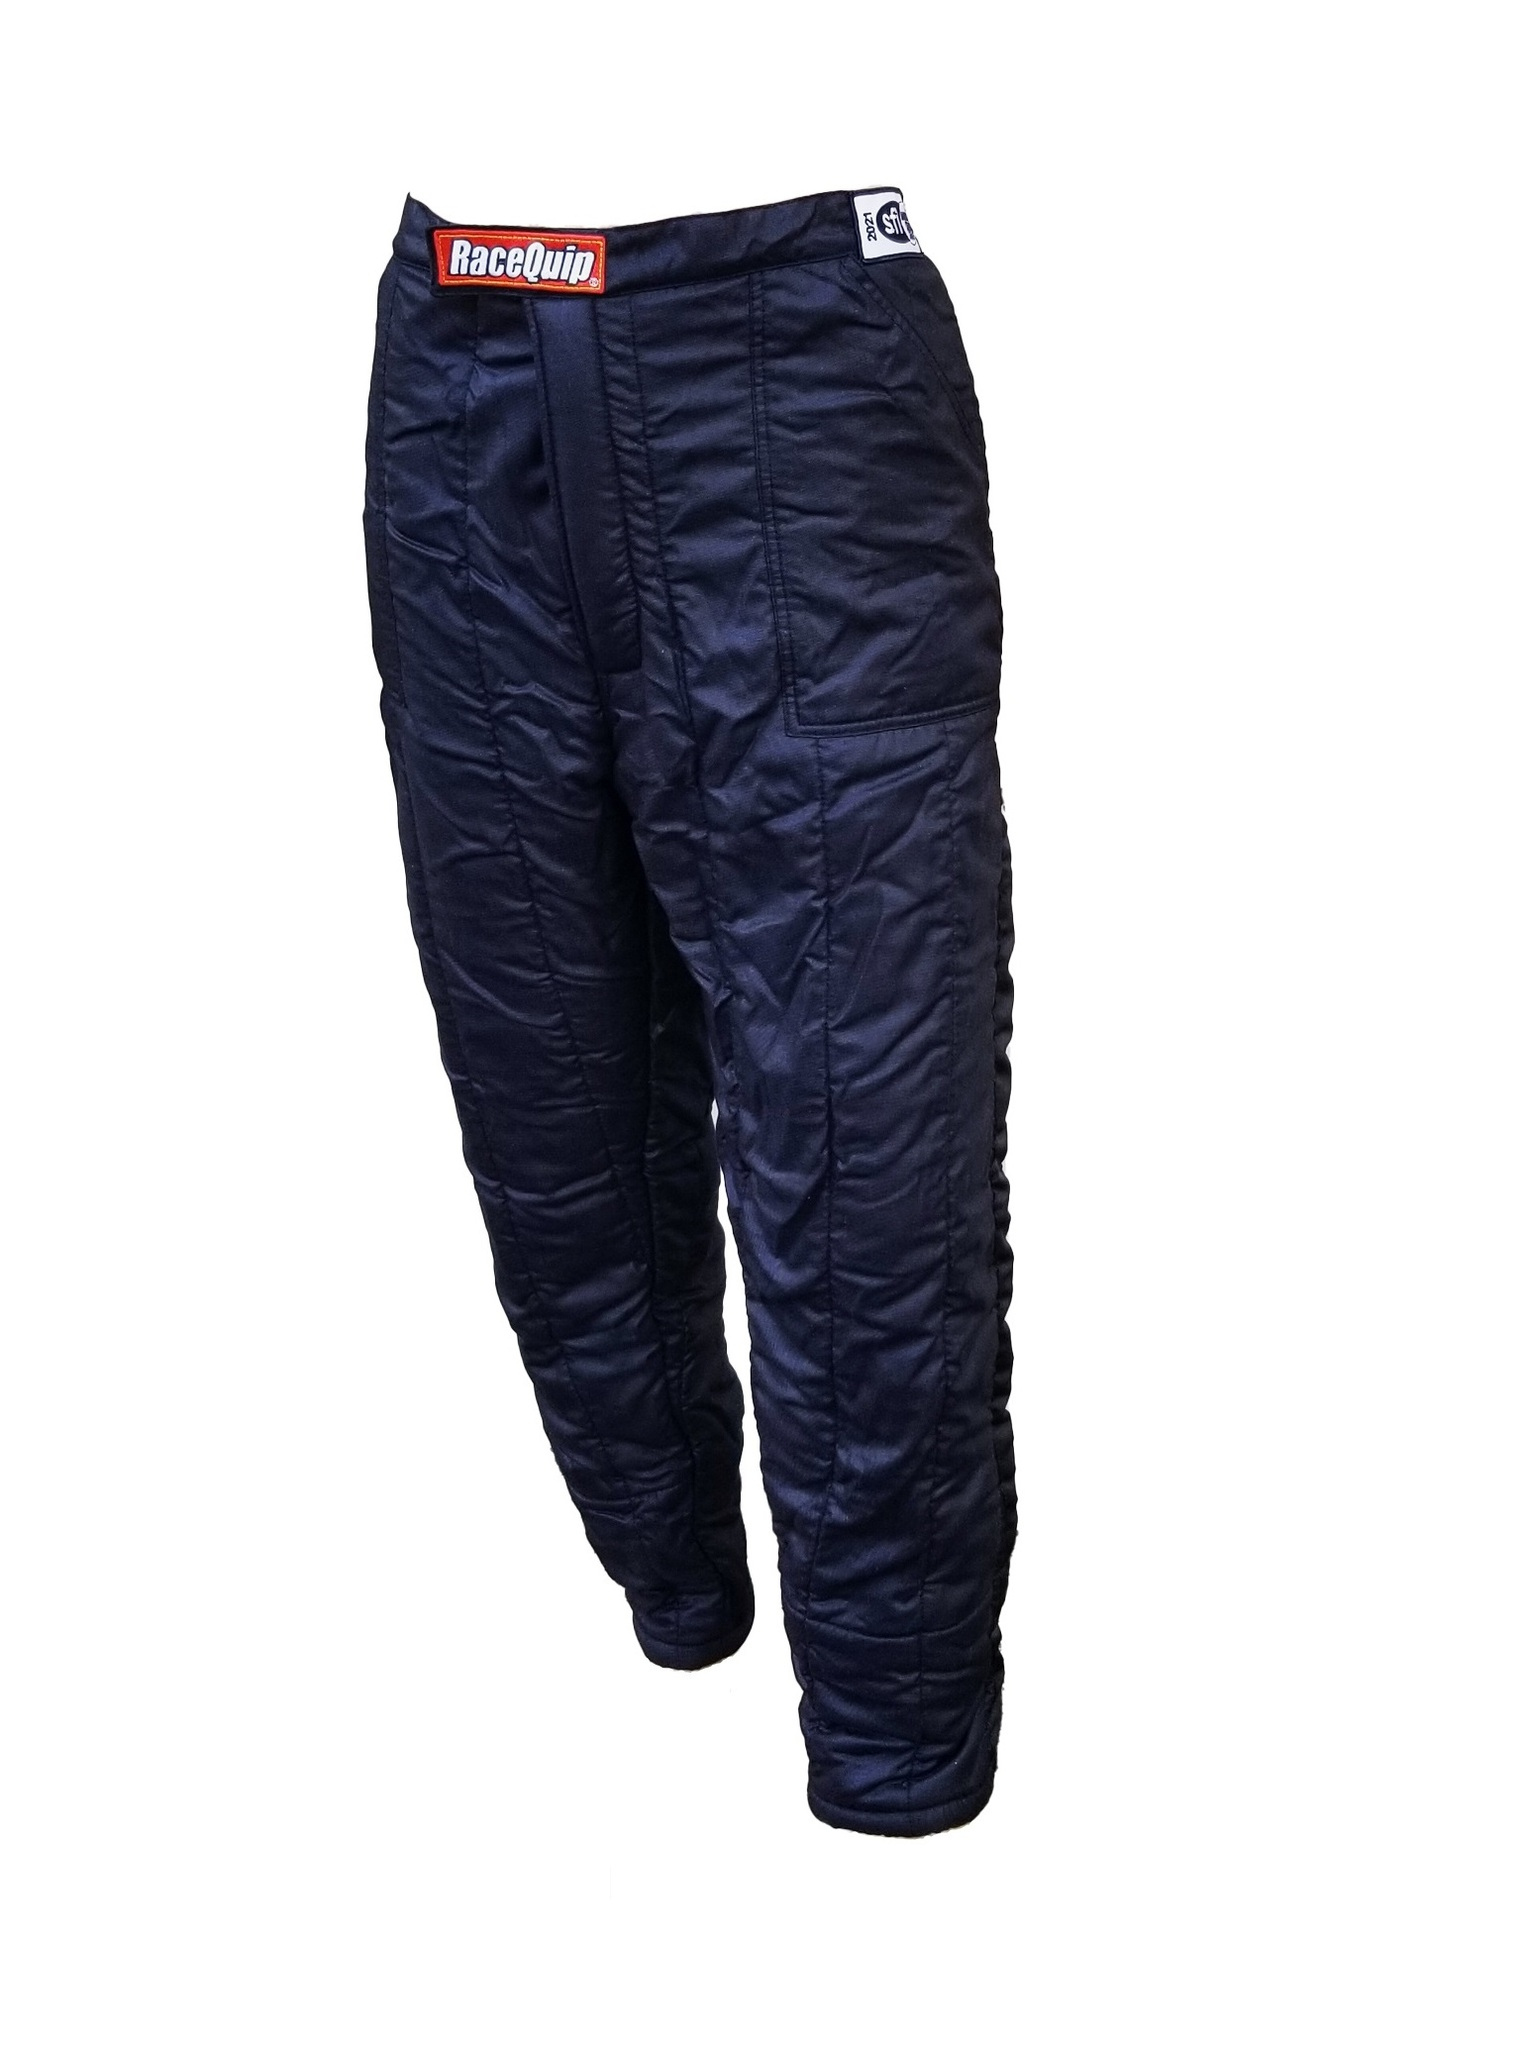 Racequip 91929979 Driving Pants, SFI 3.2A/15, Multiple Layer, Aramid Fabric / Nomex, Black, 2X-Large, Each